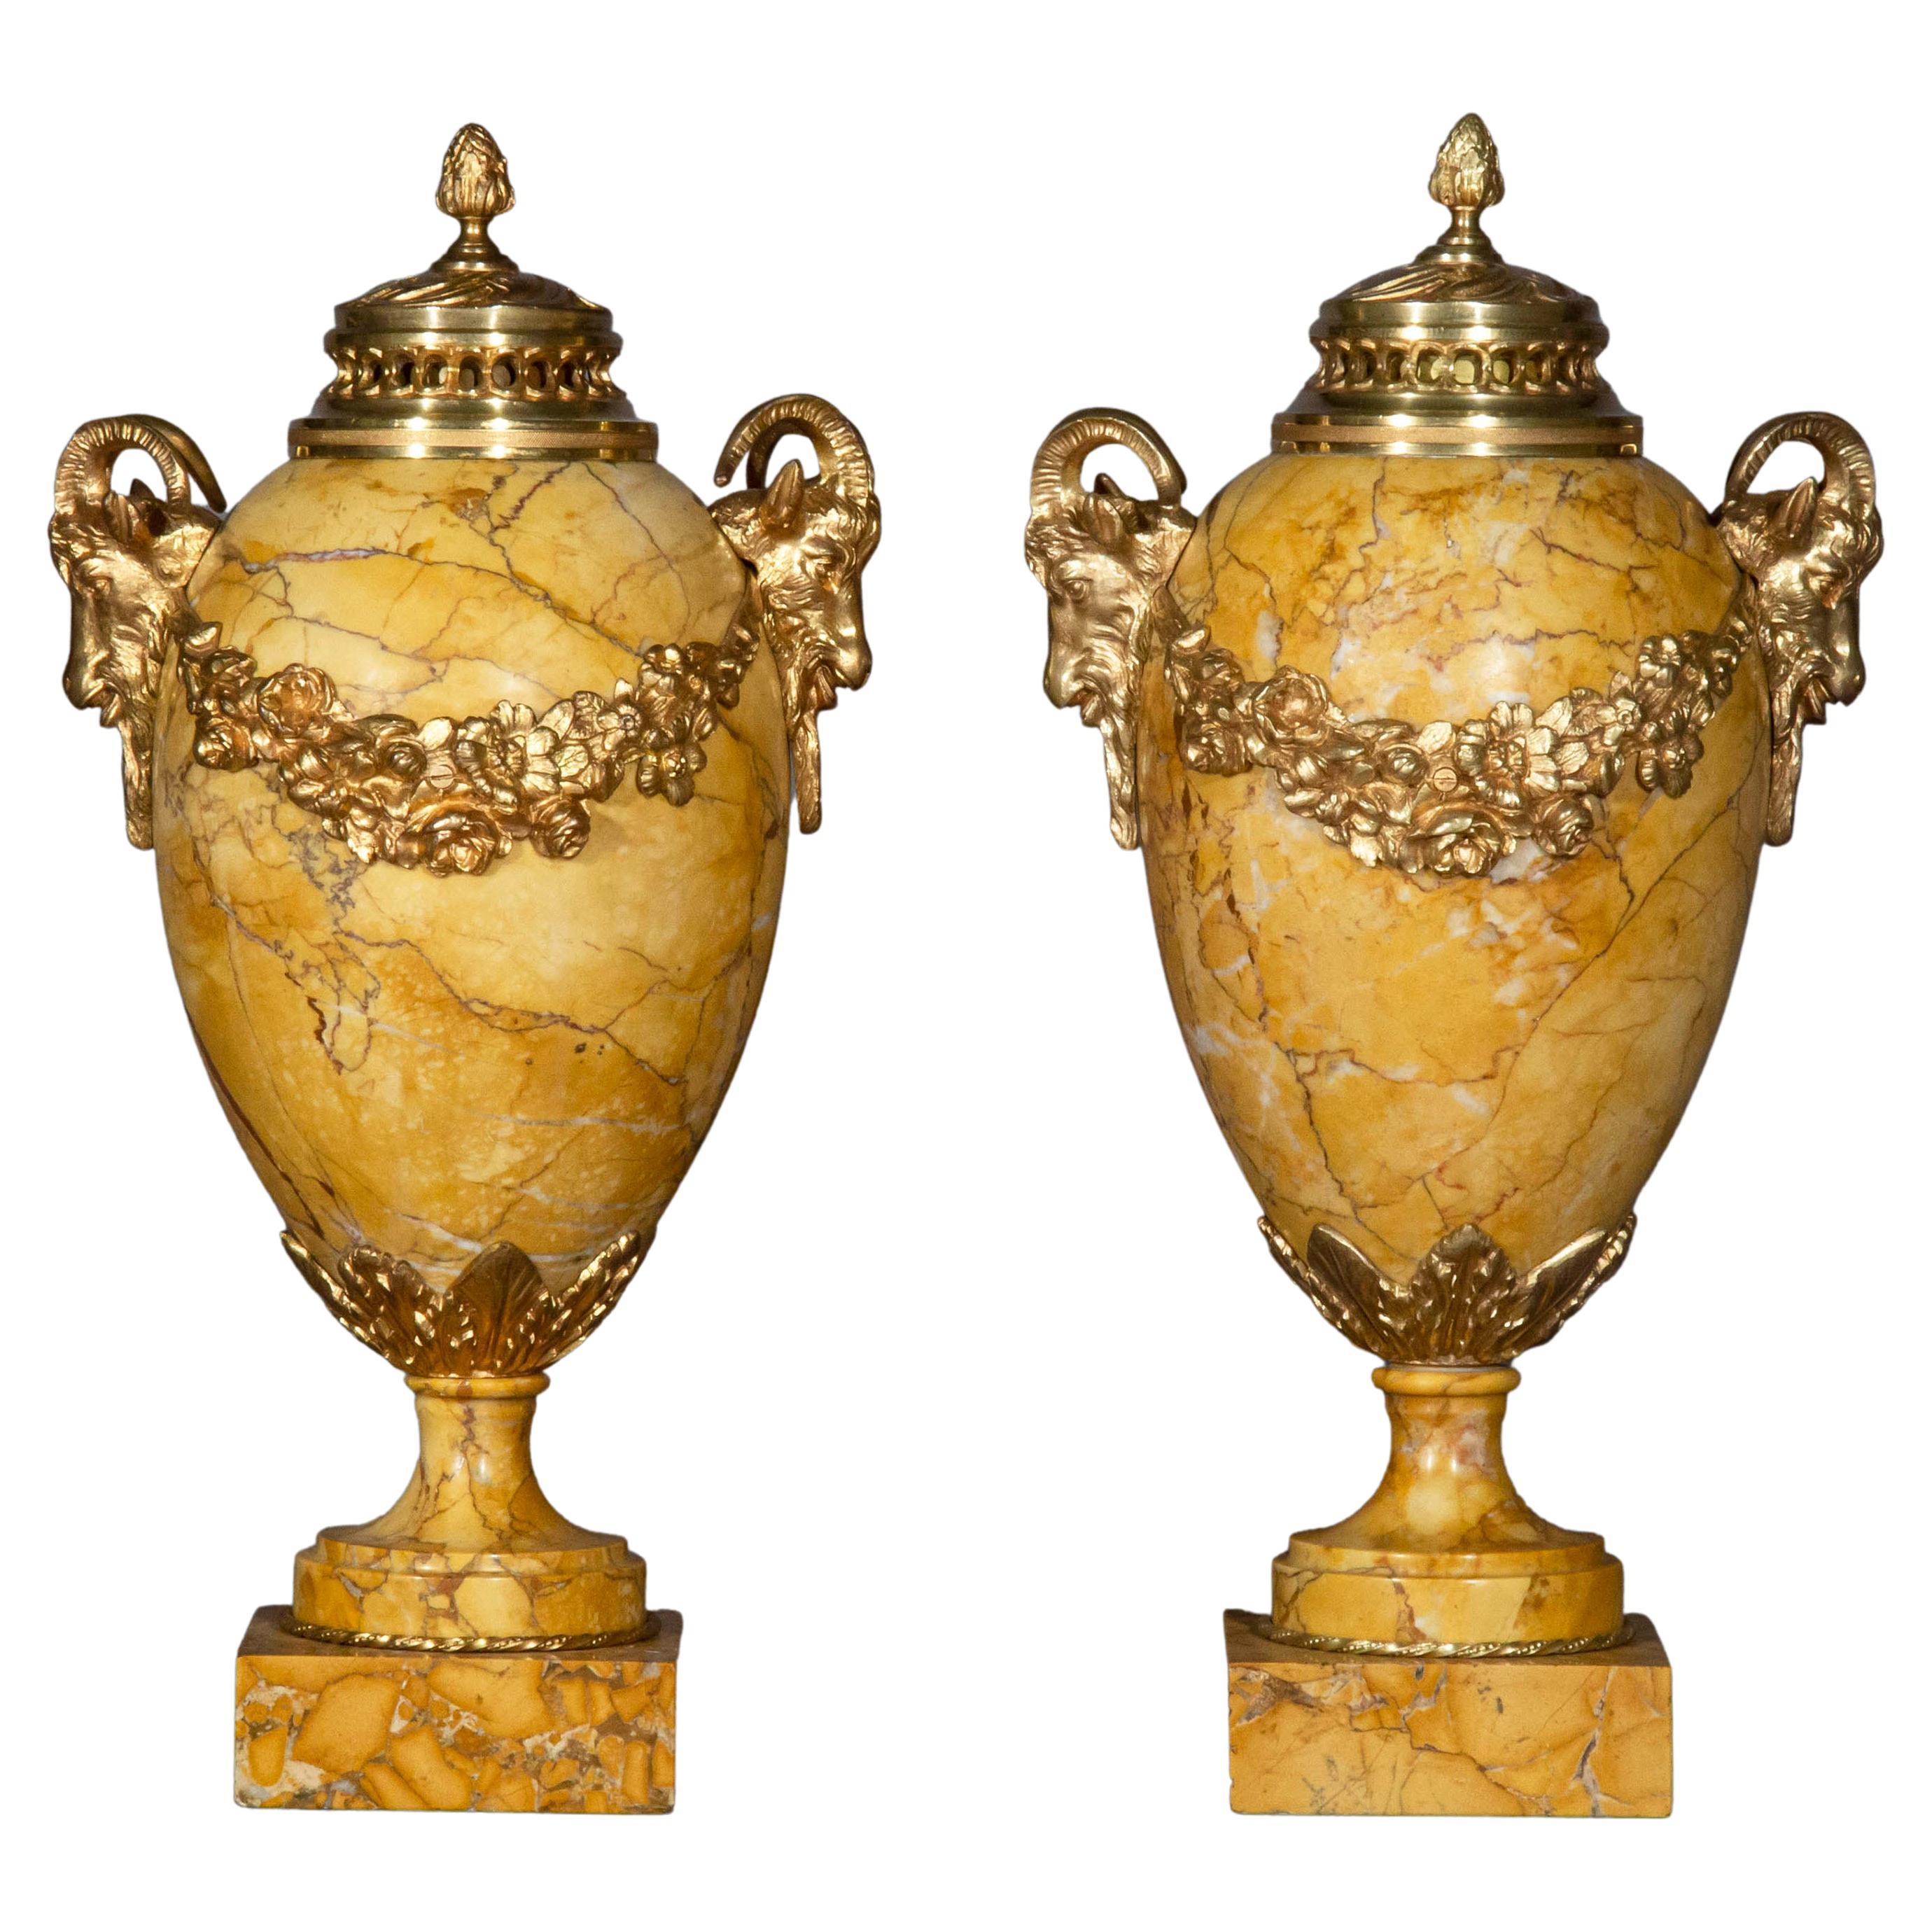 Pair of Antique Neoclassical Siena Marble Urns with Gilt Bronze Mounts For Sale